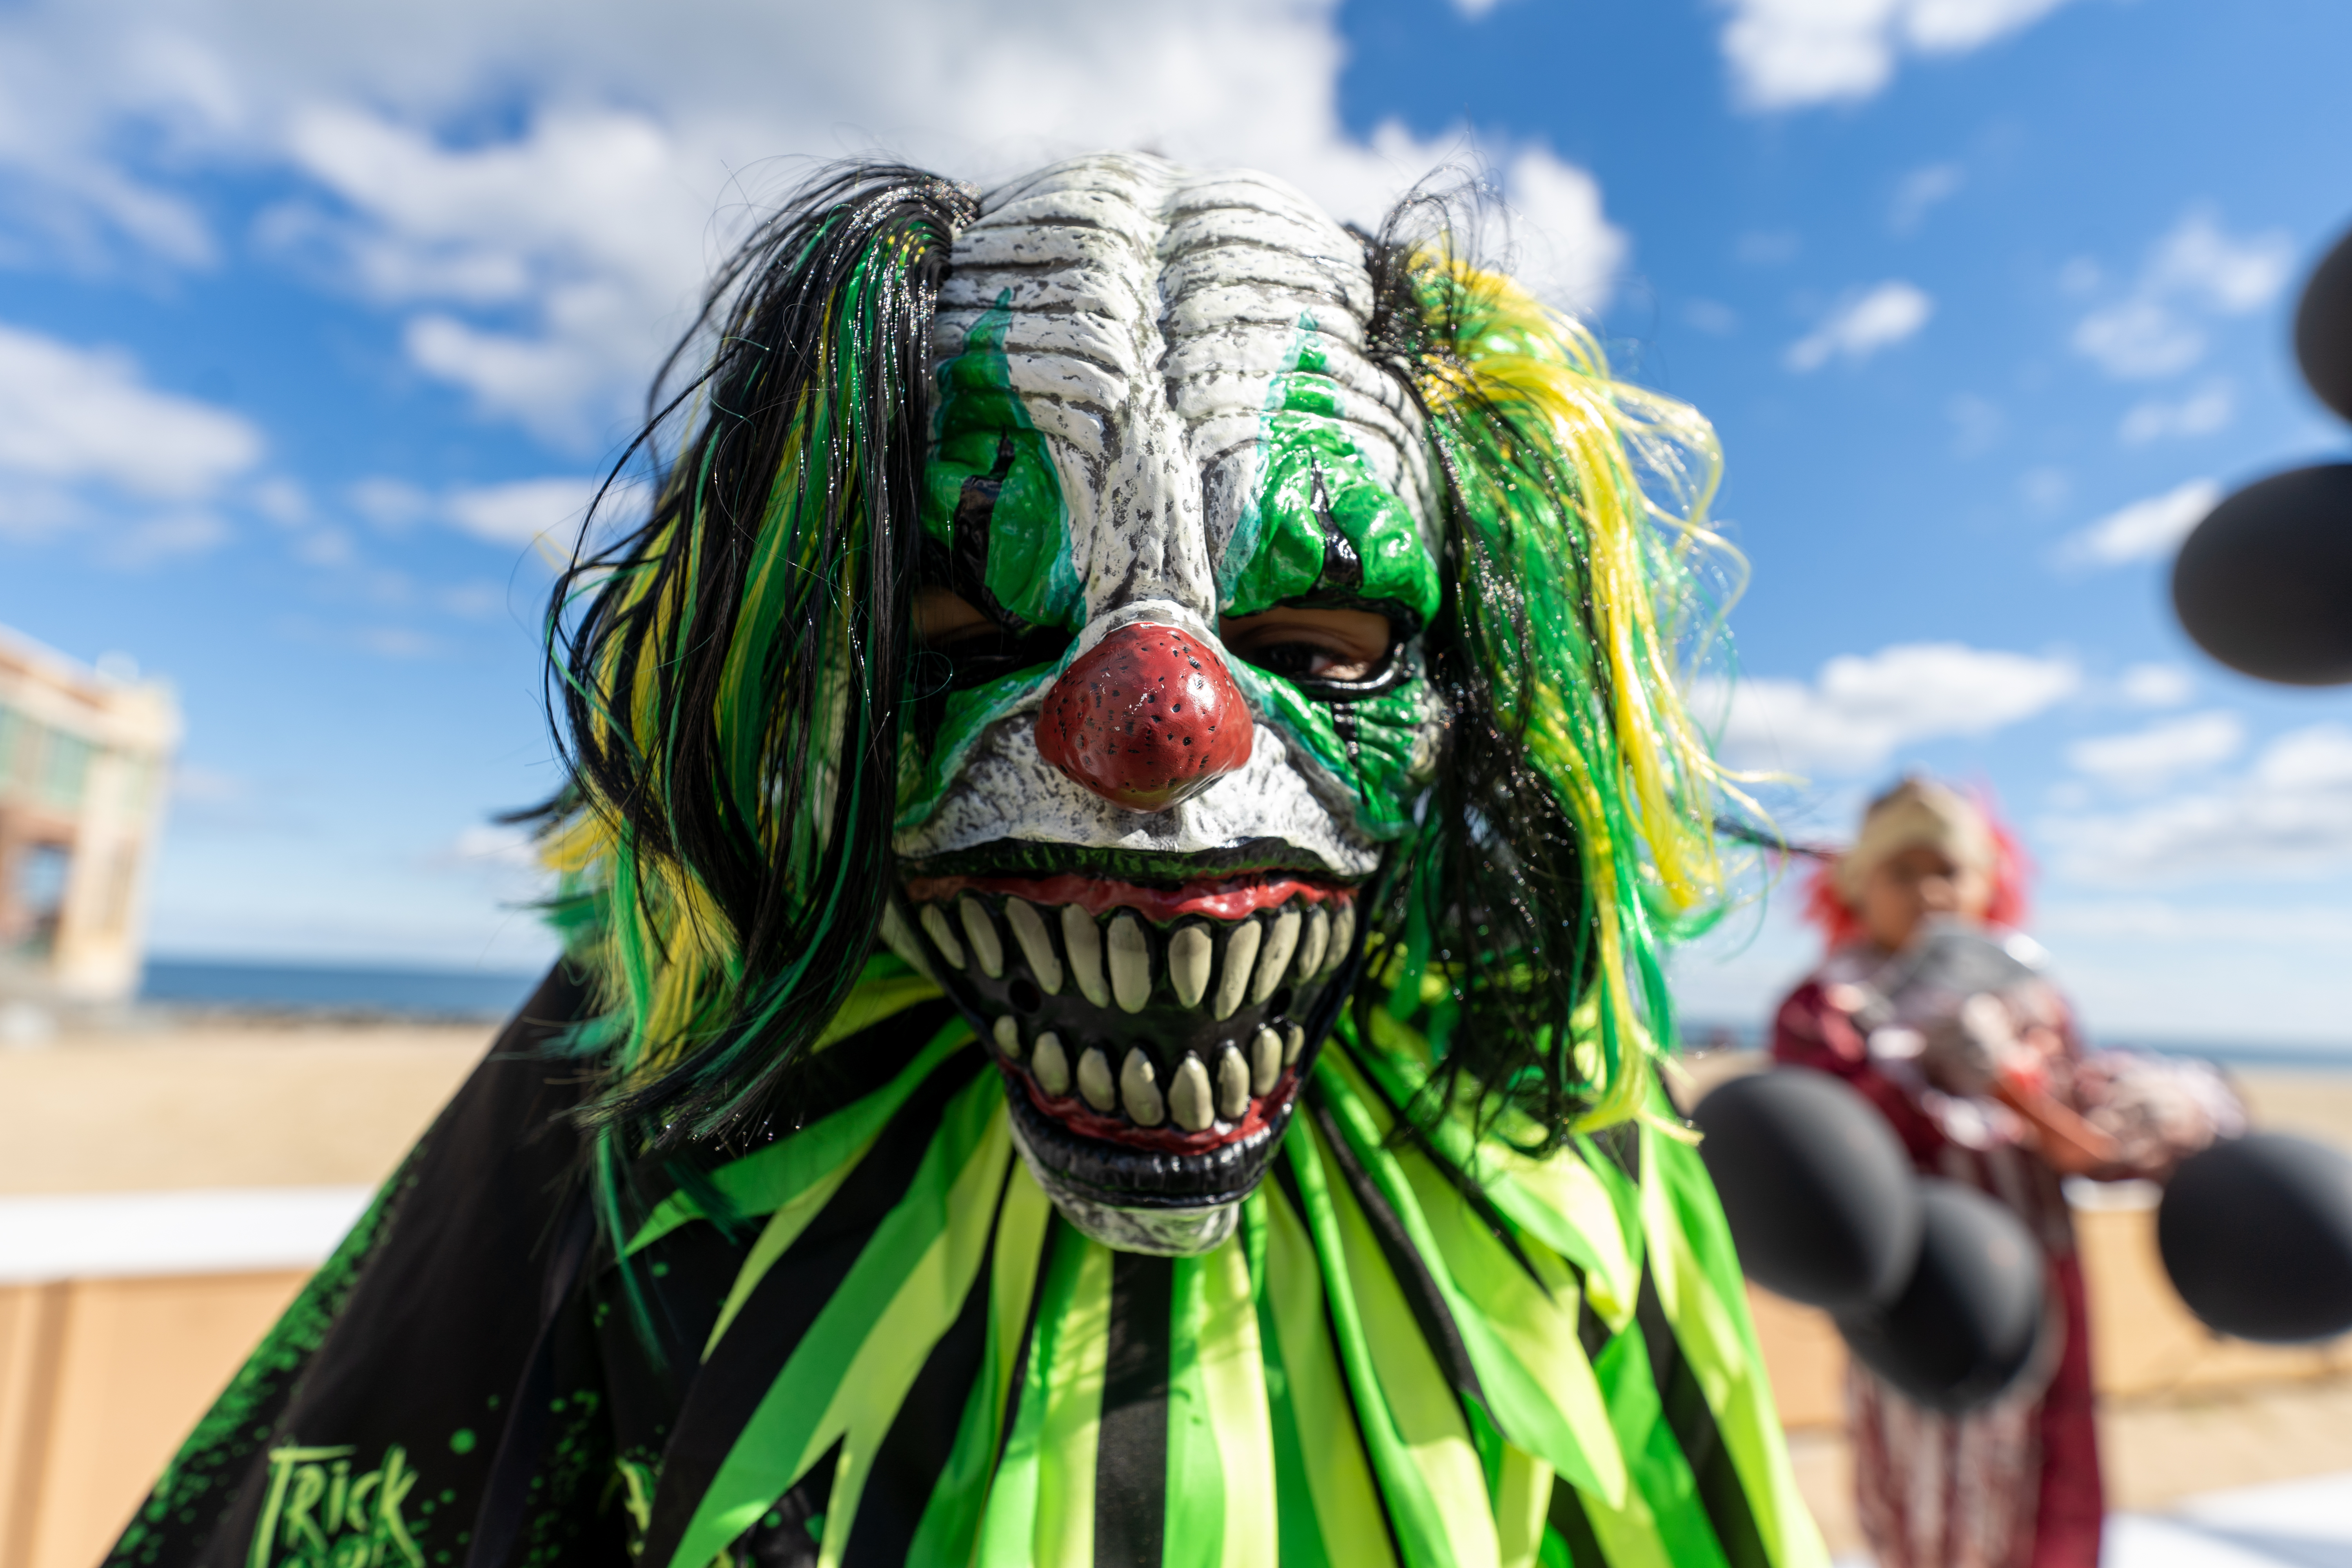 Neymar Pena, 9, dressed as a zombie clown, waits on the boardwalk for the zombie walk to begin during the 14th Asbury Park Zombie Walk in Asbury Park on Saturday, October 8, 2022. The zombie walk held its first themed year with the theme being 80's and 90's punk and metal.